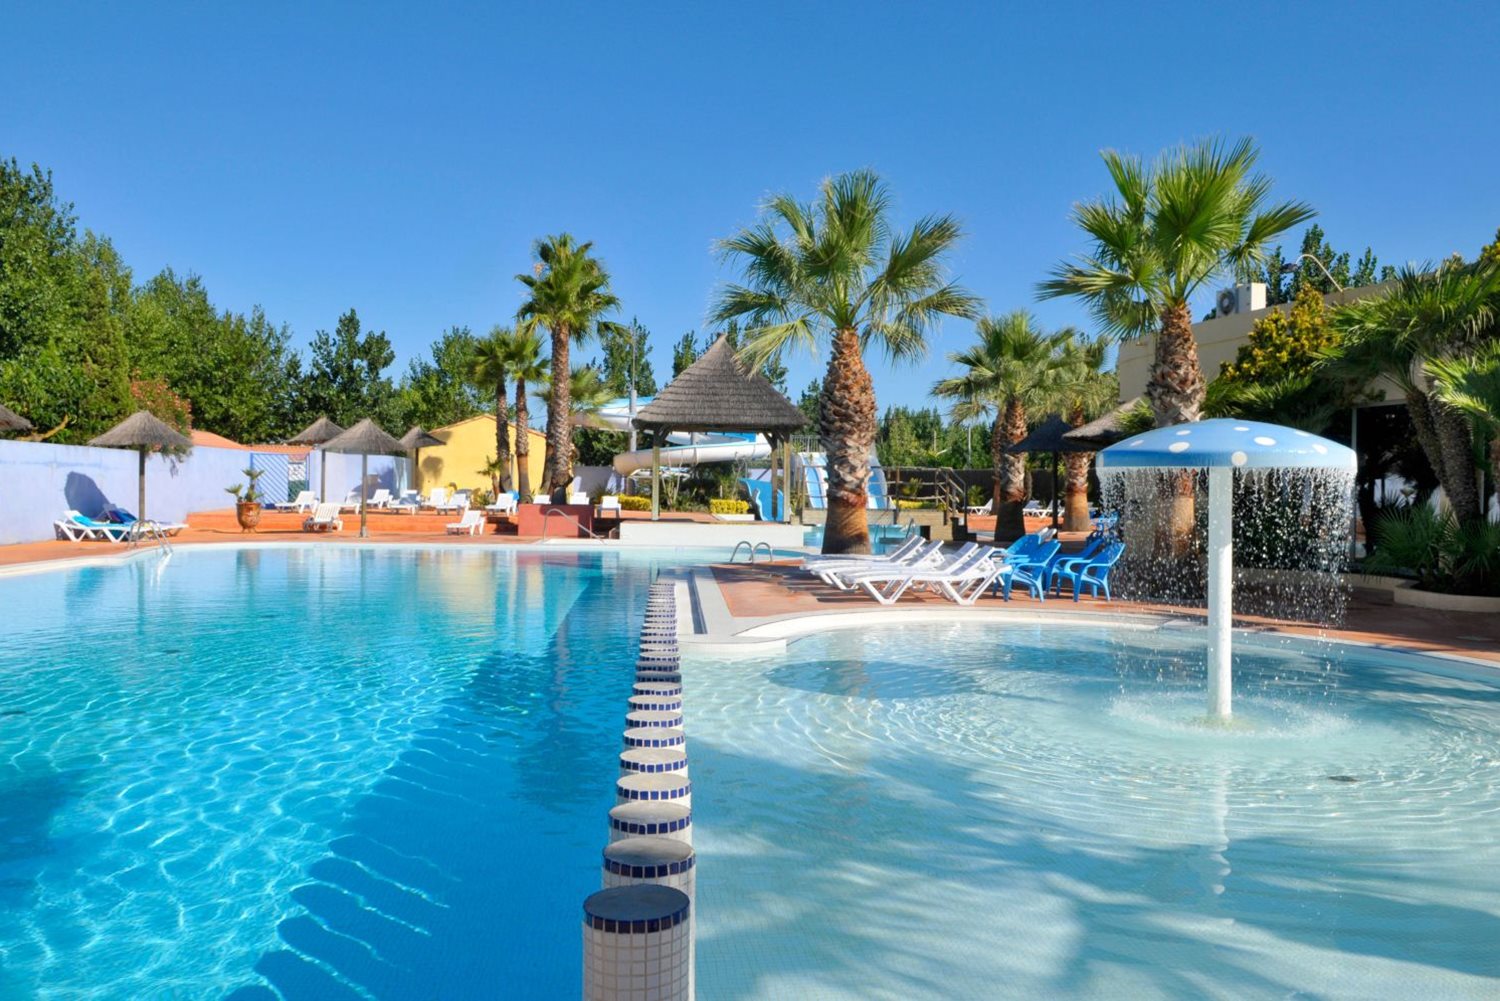 Camping Nouvelle Floride - Holiday Park in Marseillan Plage, Languedoc Roussillon, France